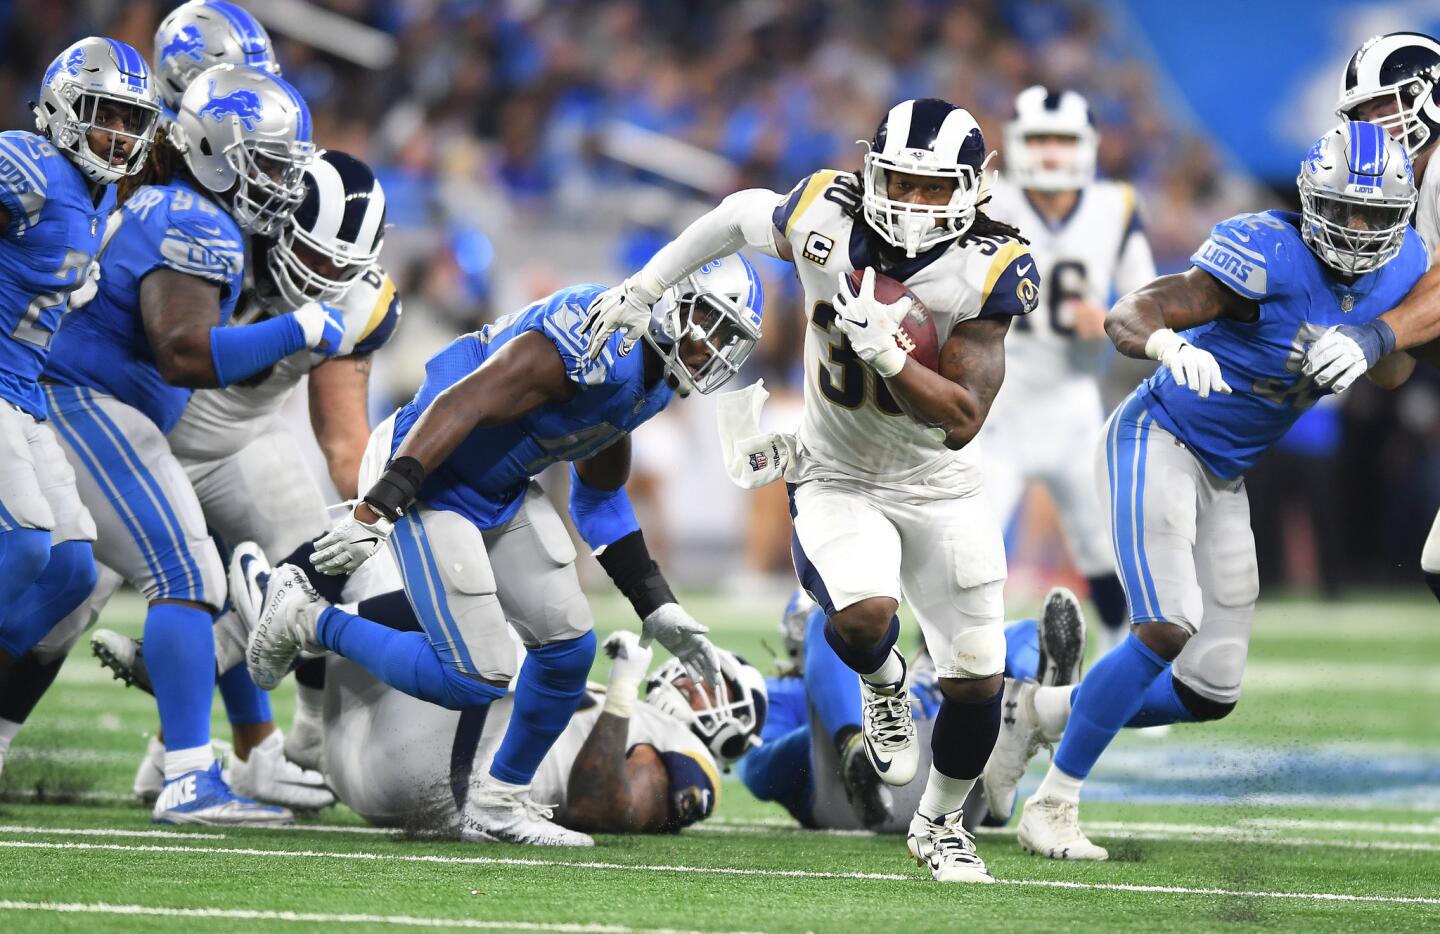 Rams running back Todd Gurley breaks free from the Detroit Lions defense but stops short of the goal line to kill time on the clock late in the fourth quarter at Ford Field in Detroit on Sunday.